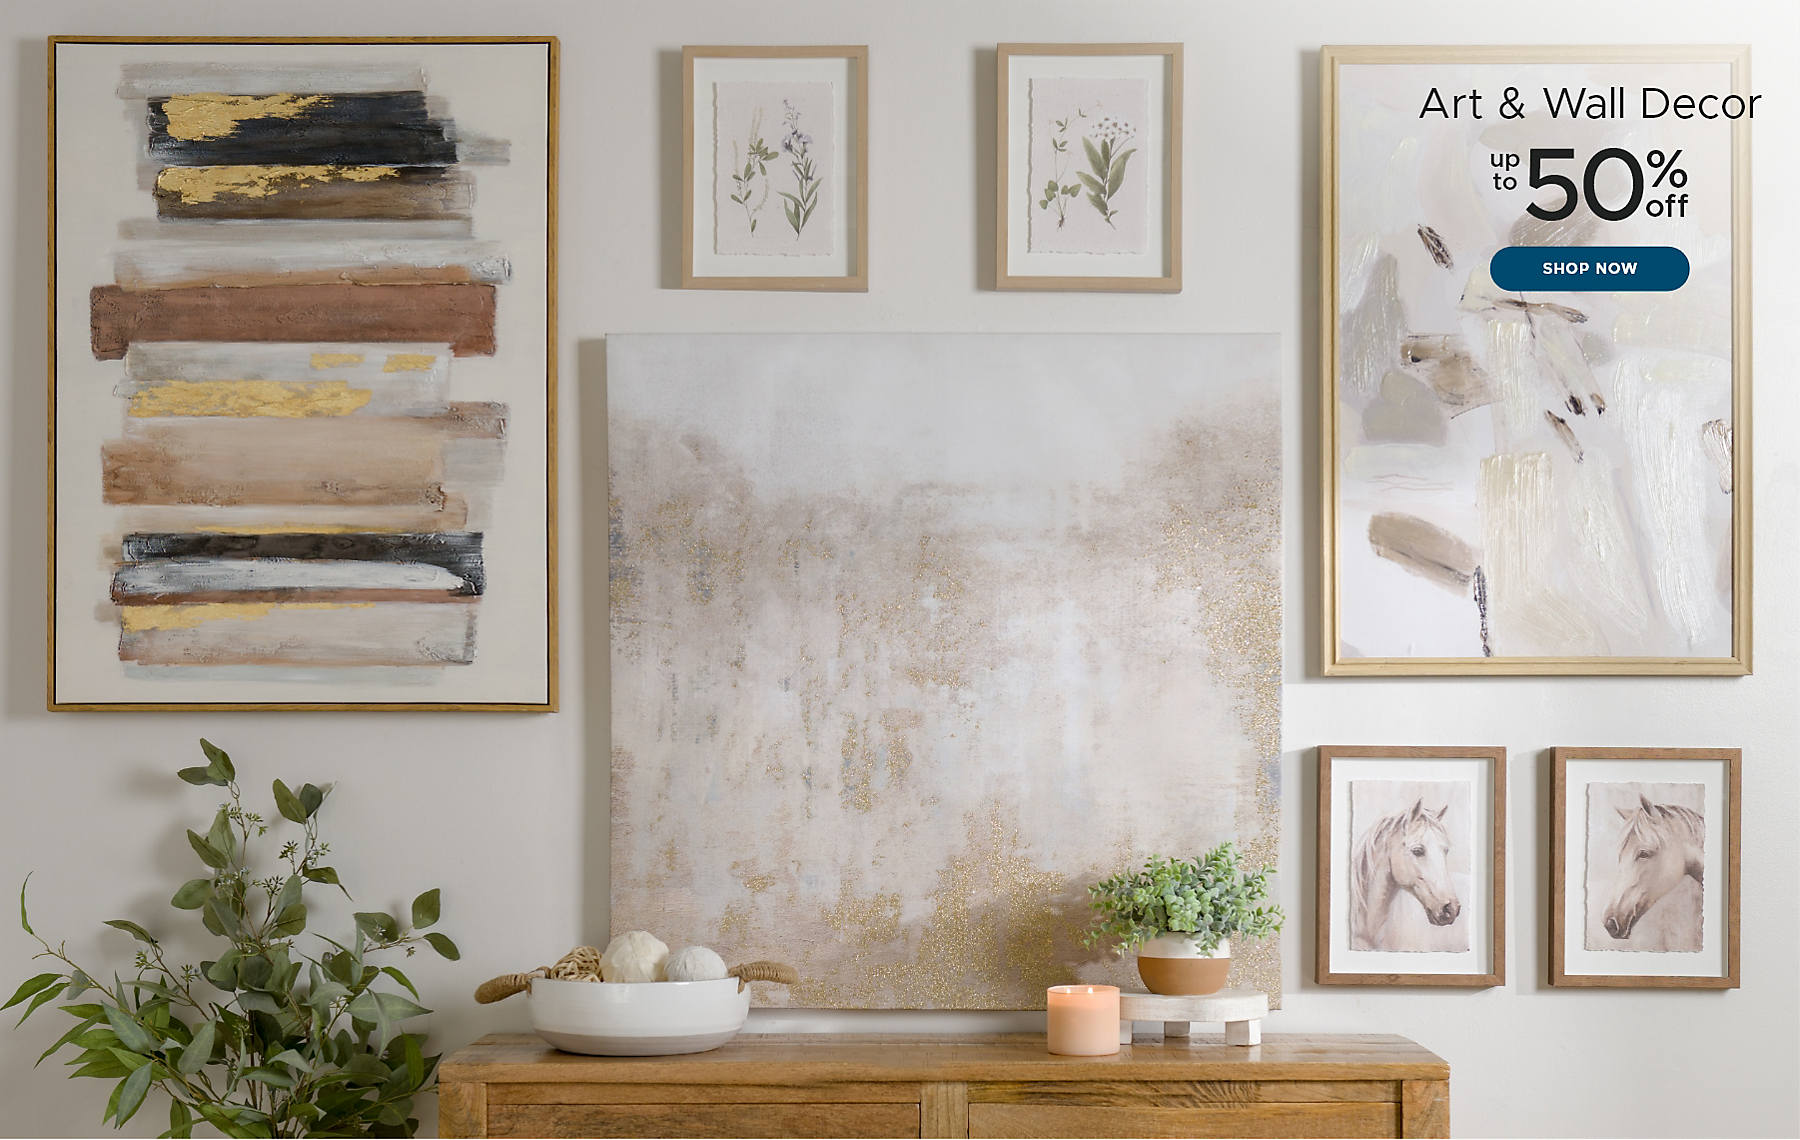 Art & Wall Decor up to 50% off shop now